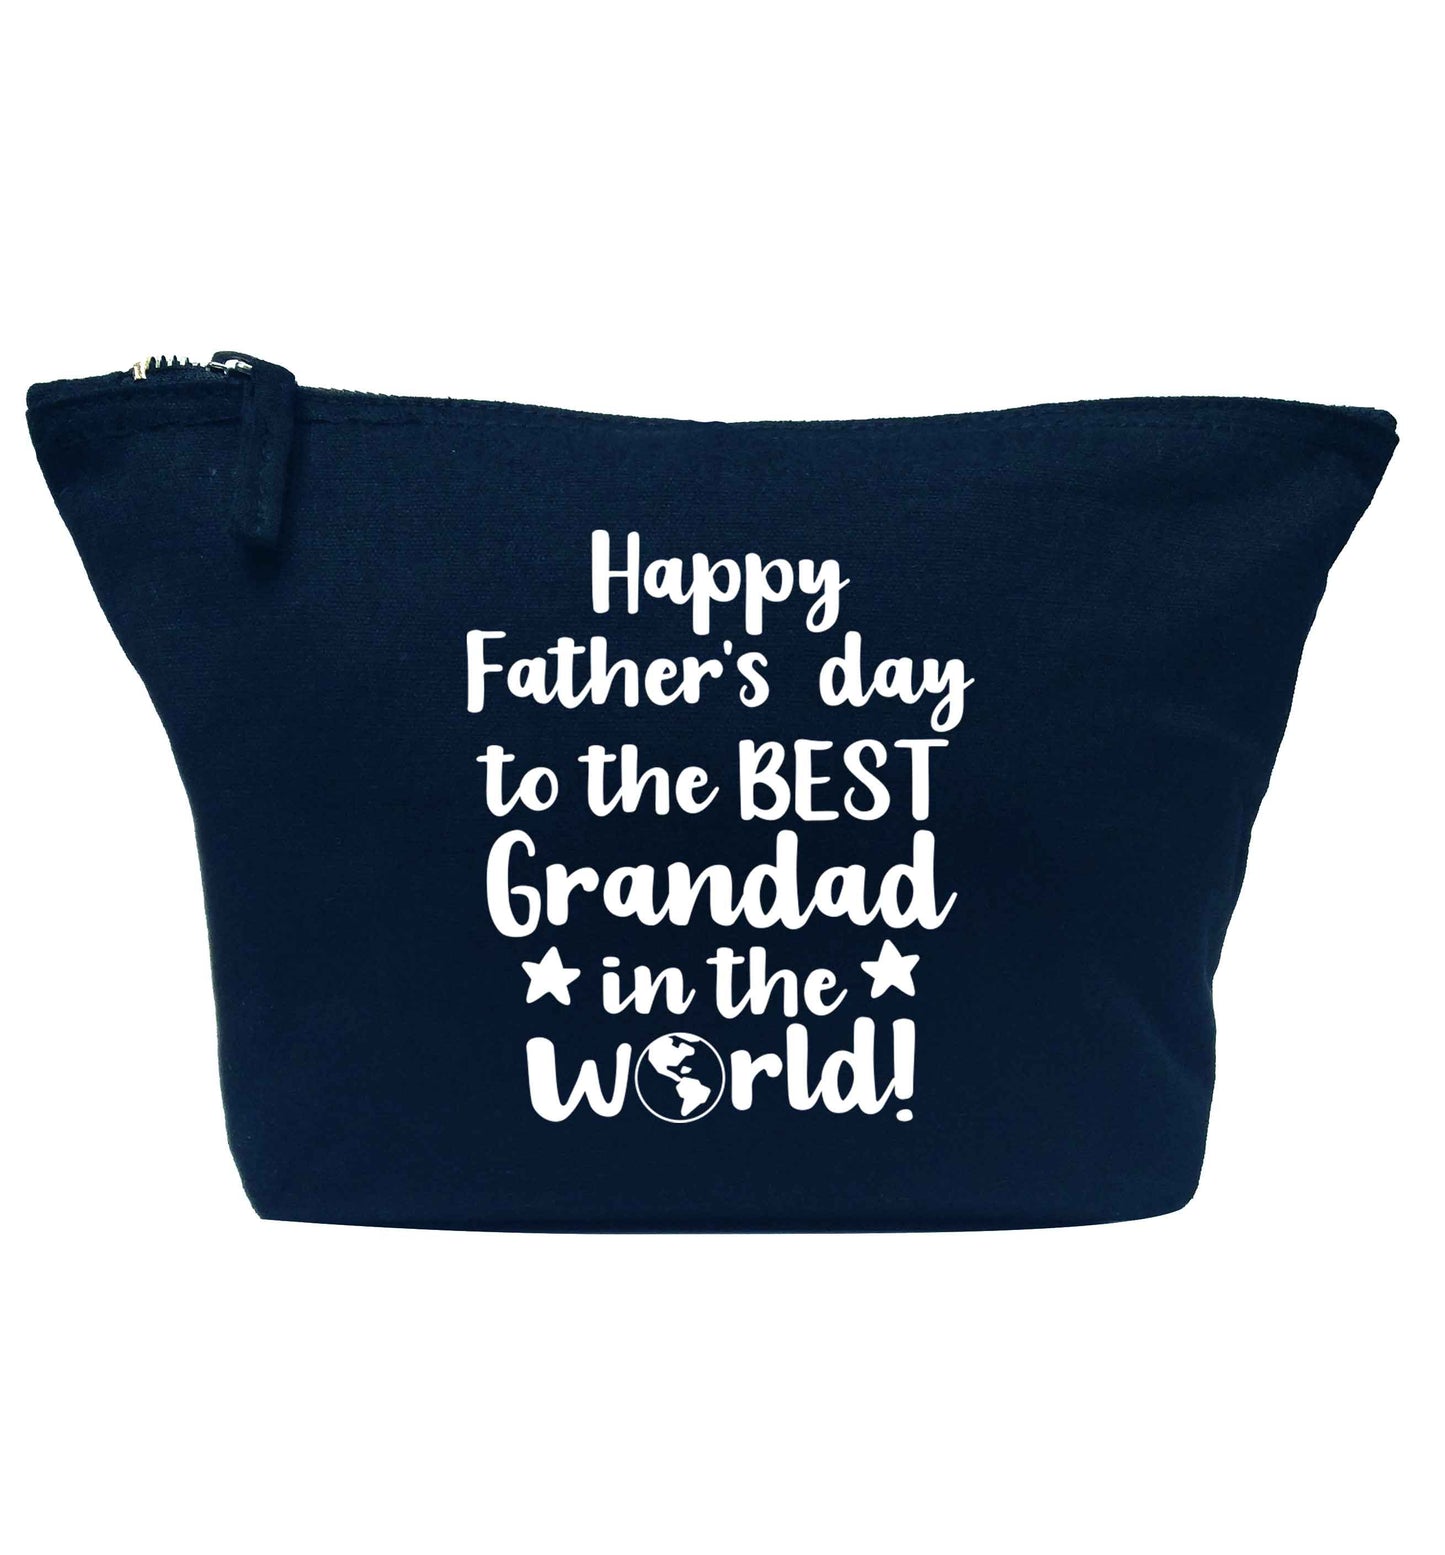 Happy Father's day to the best grandad in the world navy makeup bag